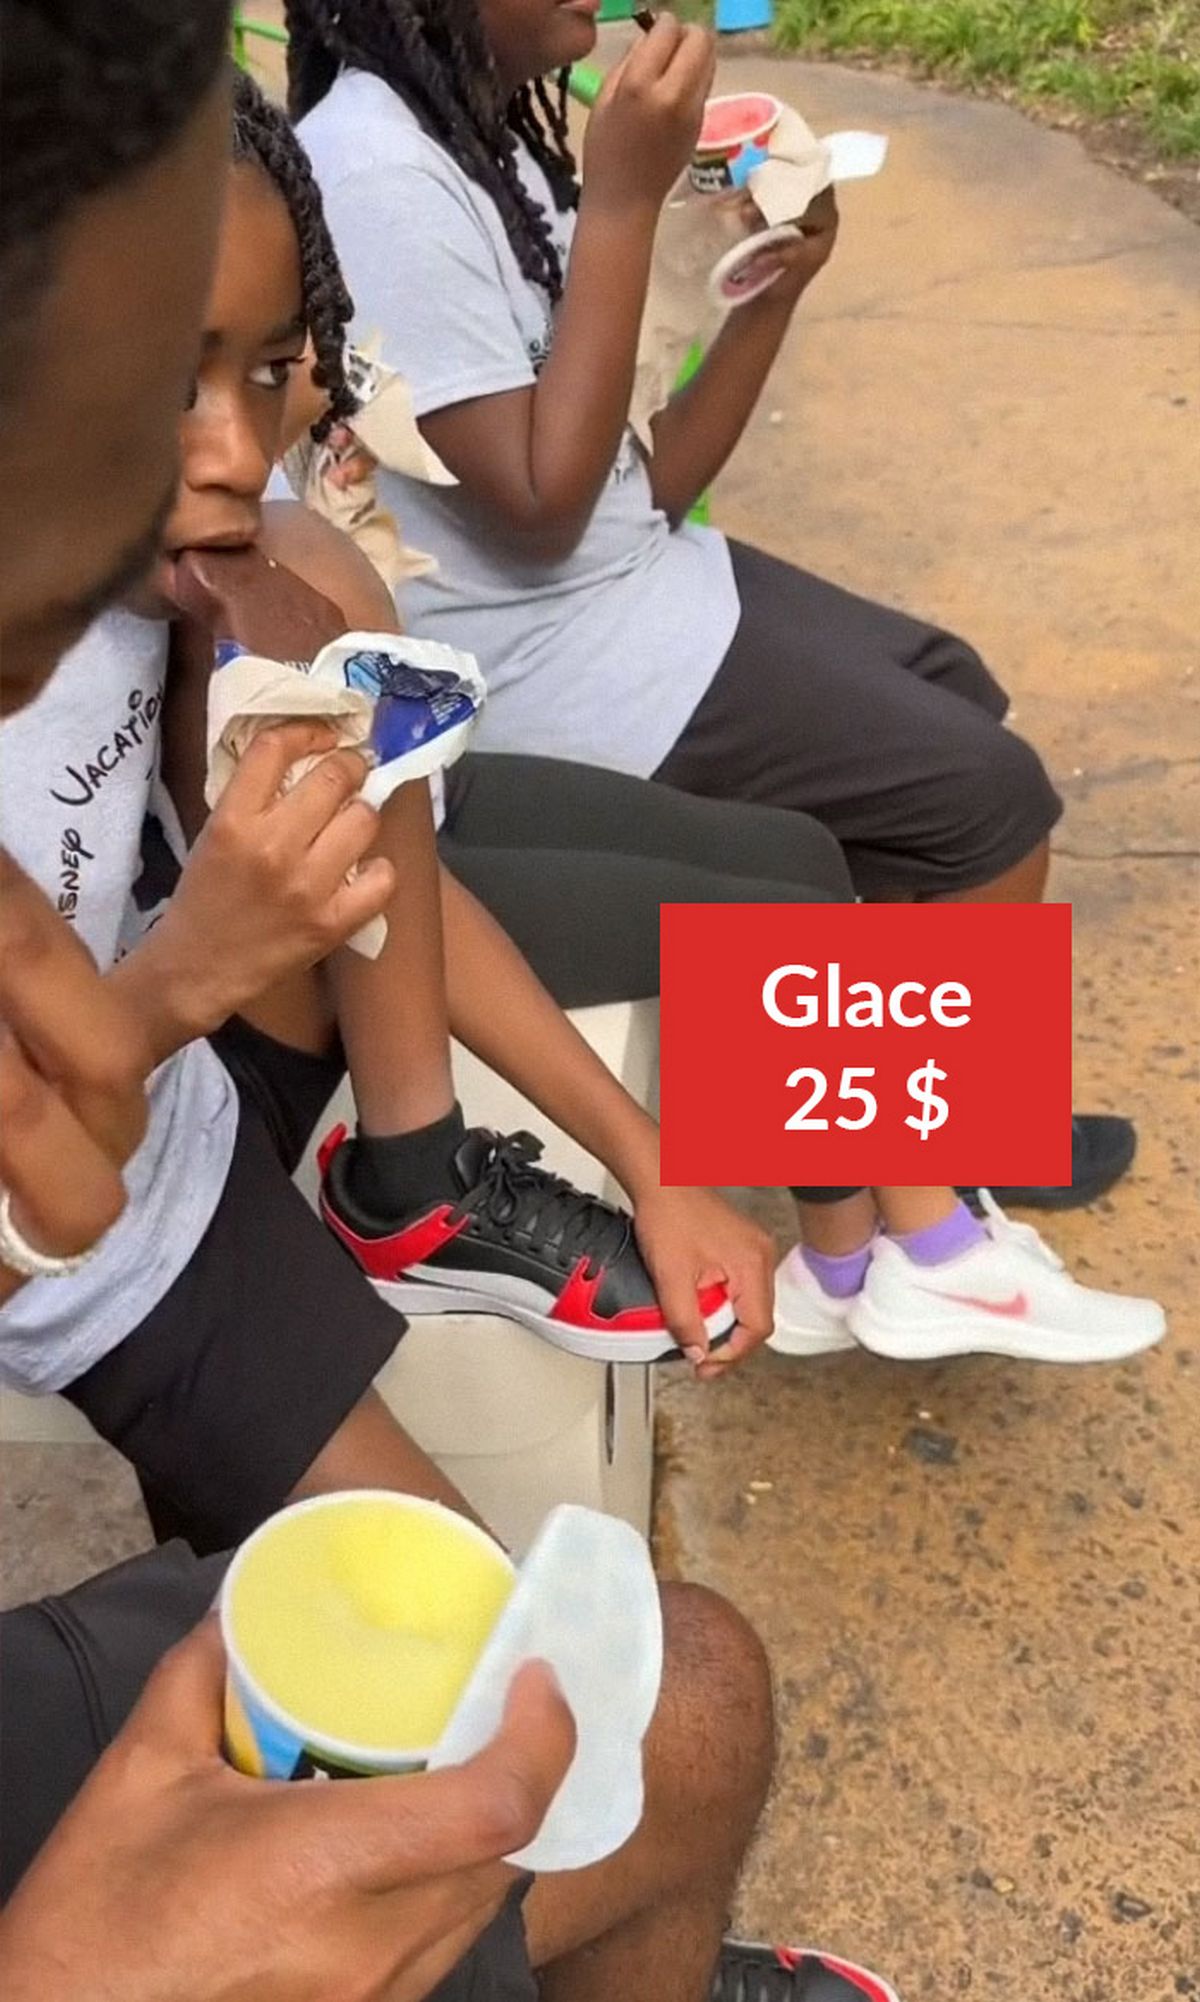 Glace : 25 $ (24 €)